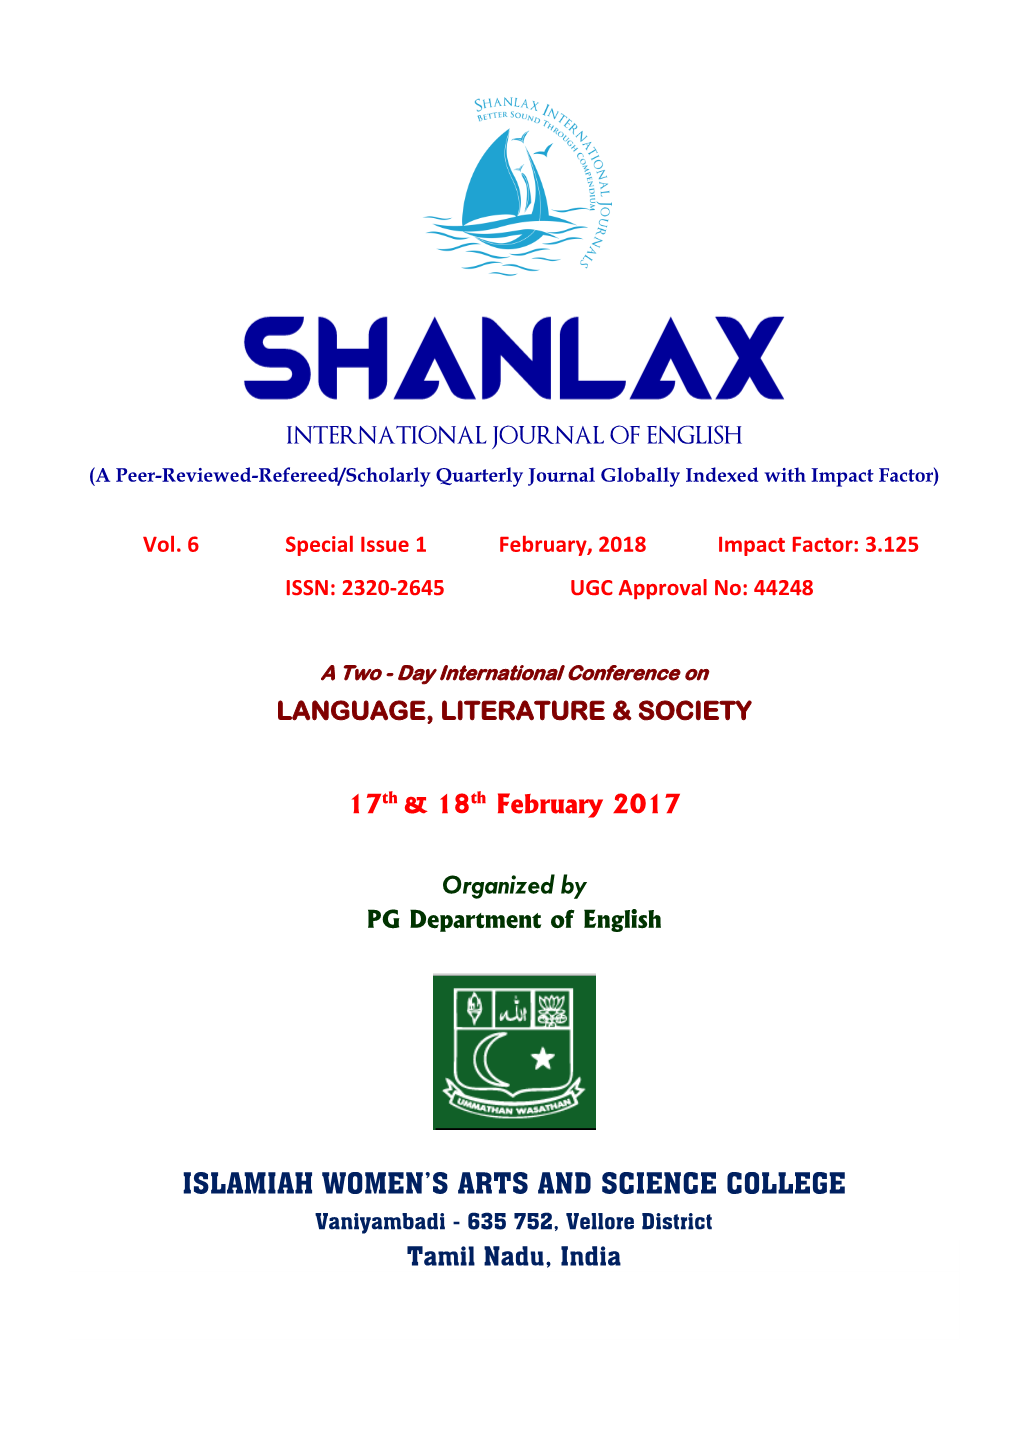 Organized by ISLAMIAH WOMEN's ARTS and SCIENCE COLLEGE